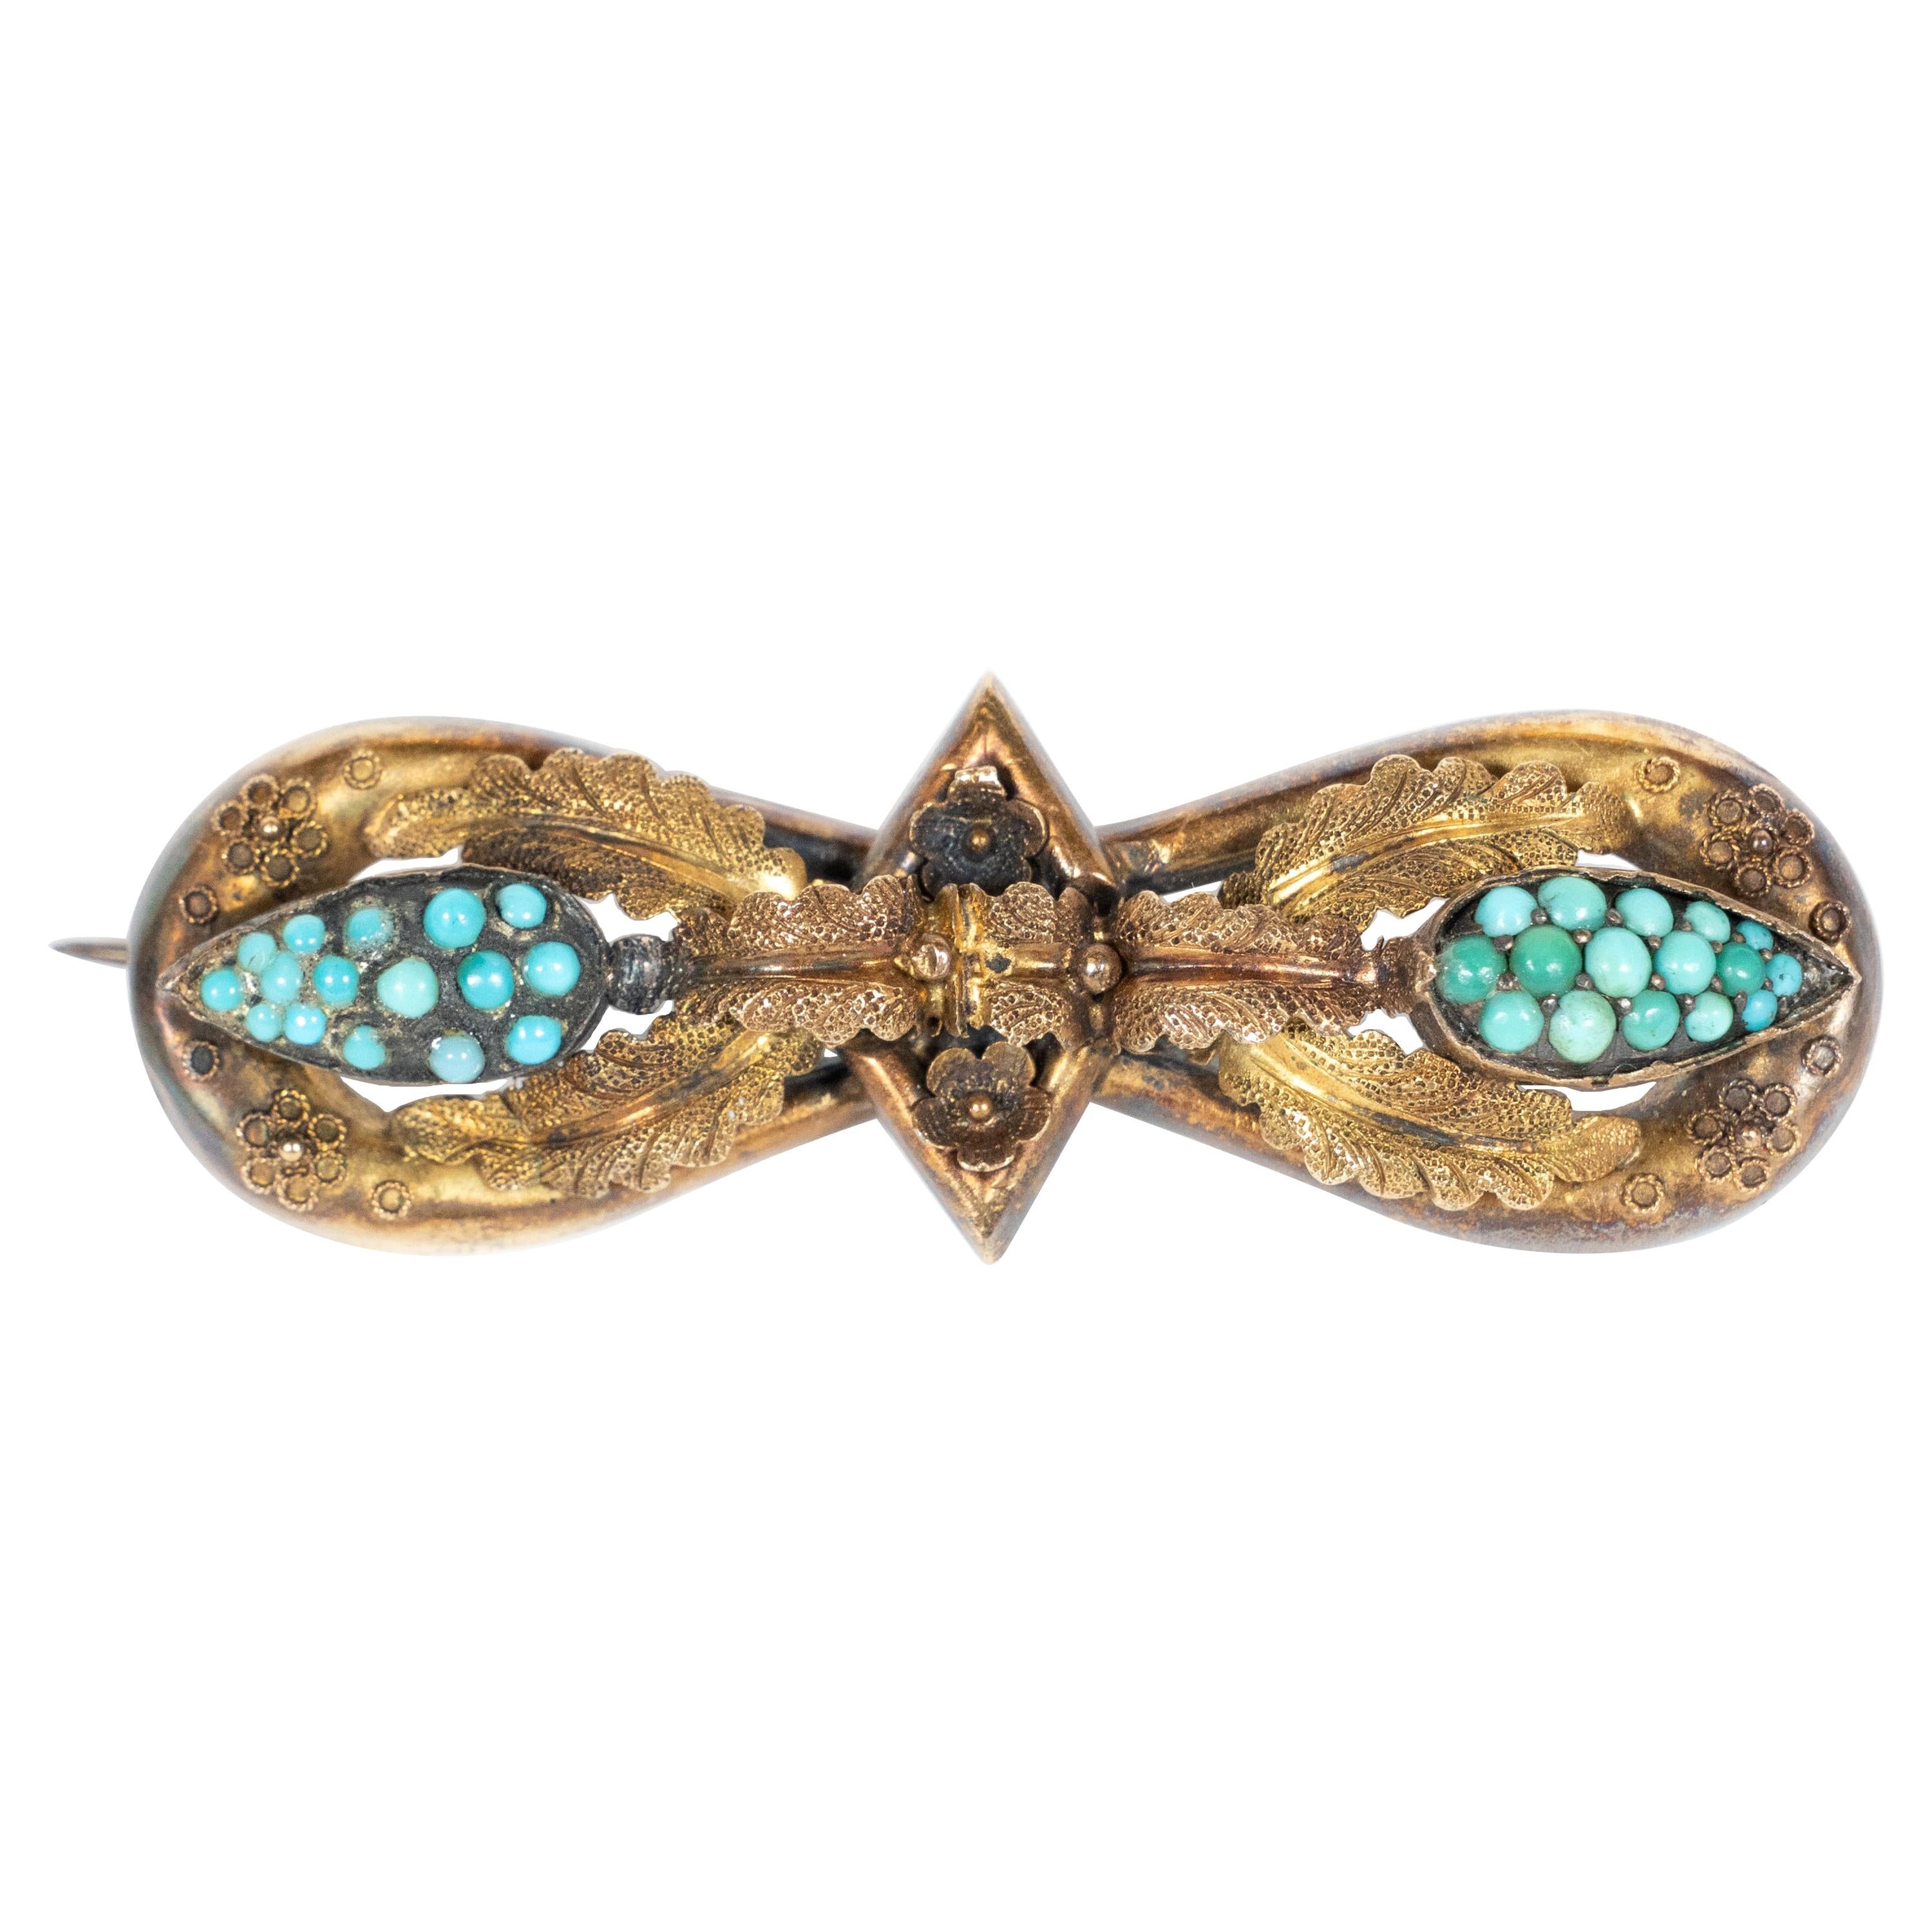 Victorian Hourglass Form 14 Karat Gold Filigreed Brooch with Inlaid Turquoise